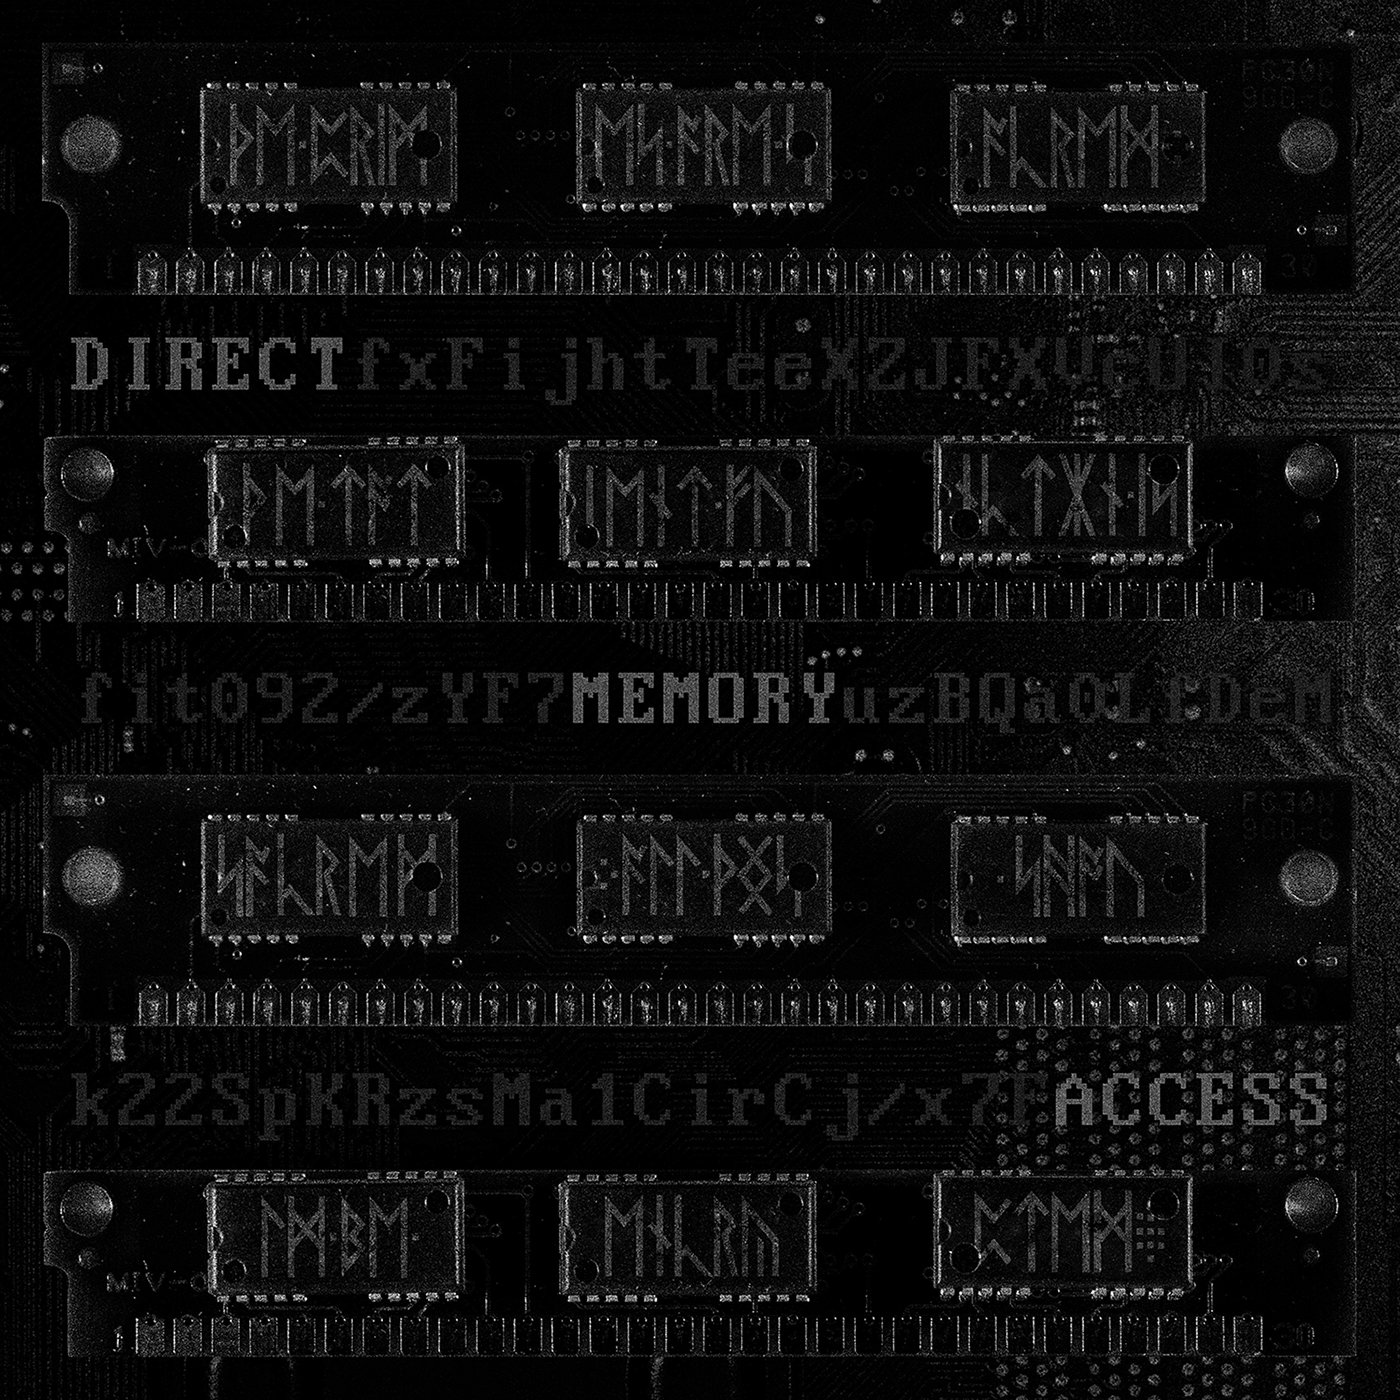 MASTER_BOOT_RECORD_-_Discography/2018_-_08_-_MASTER_BOOT_RECORD_-_DIRECT_MEMORY_ACCESS